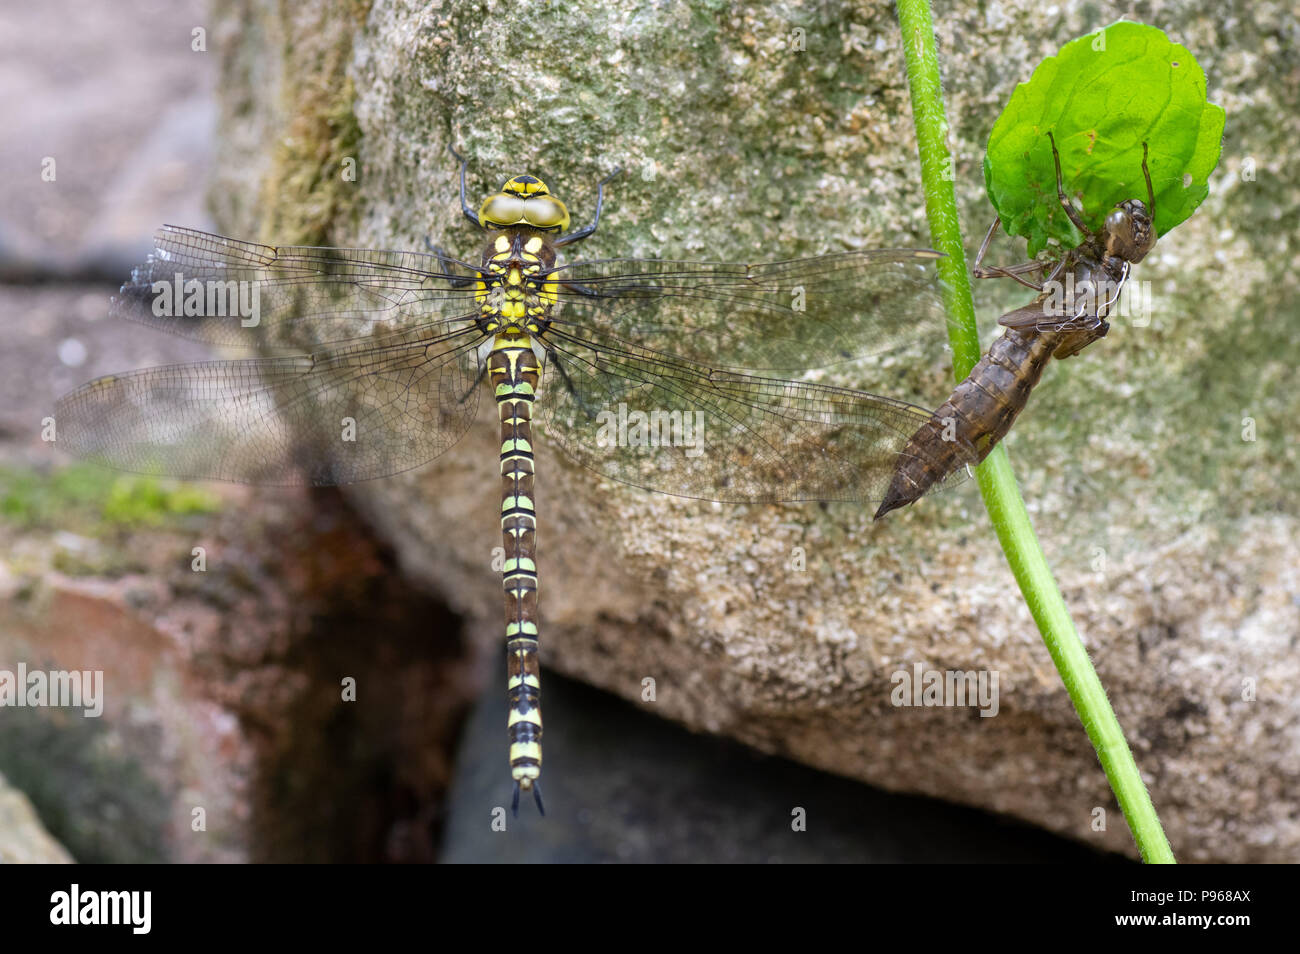 Southern hawker (Aeshna cyanea) dragonfly with exuvia. Female insect in the order Odonata, family Aeshnidae, alongside shed larval skin Stock Photo